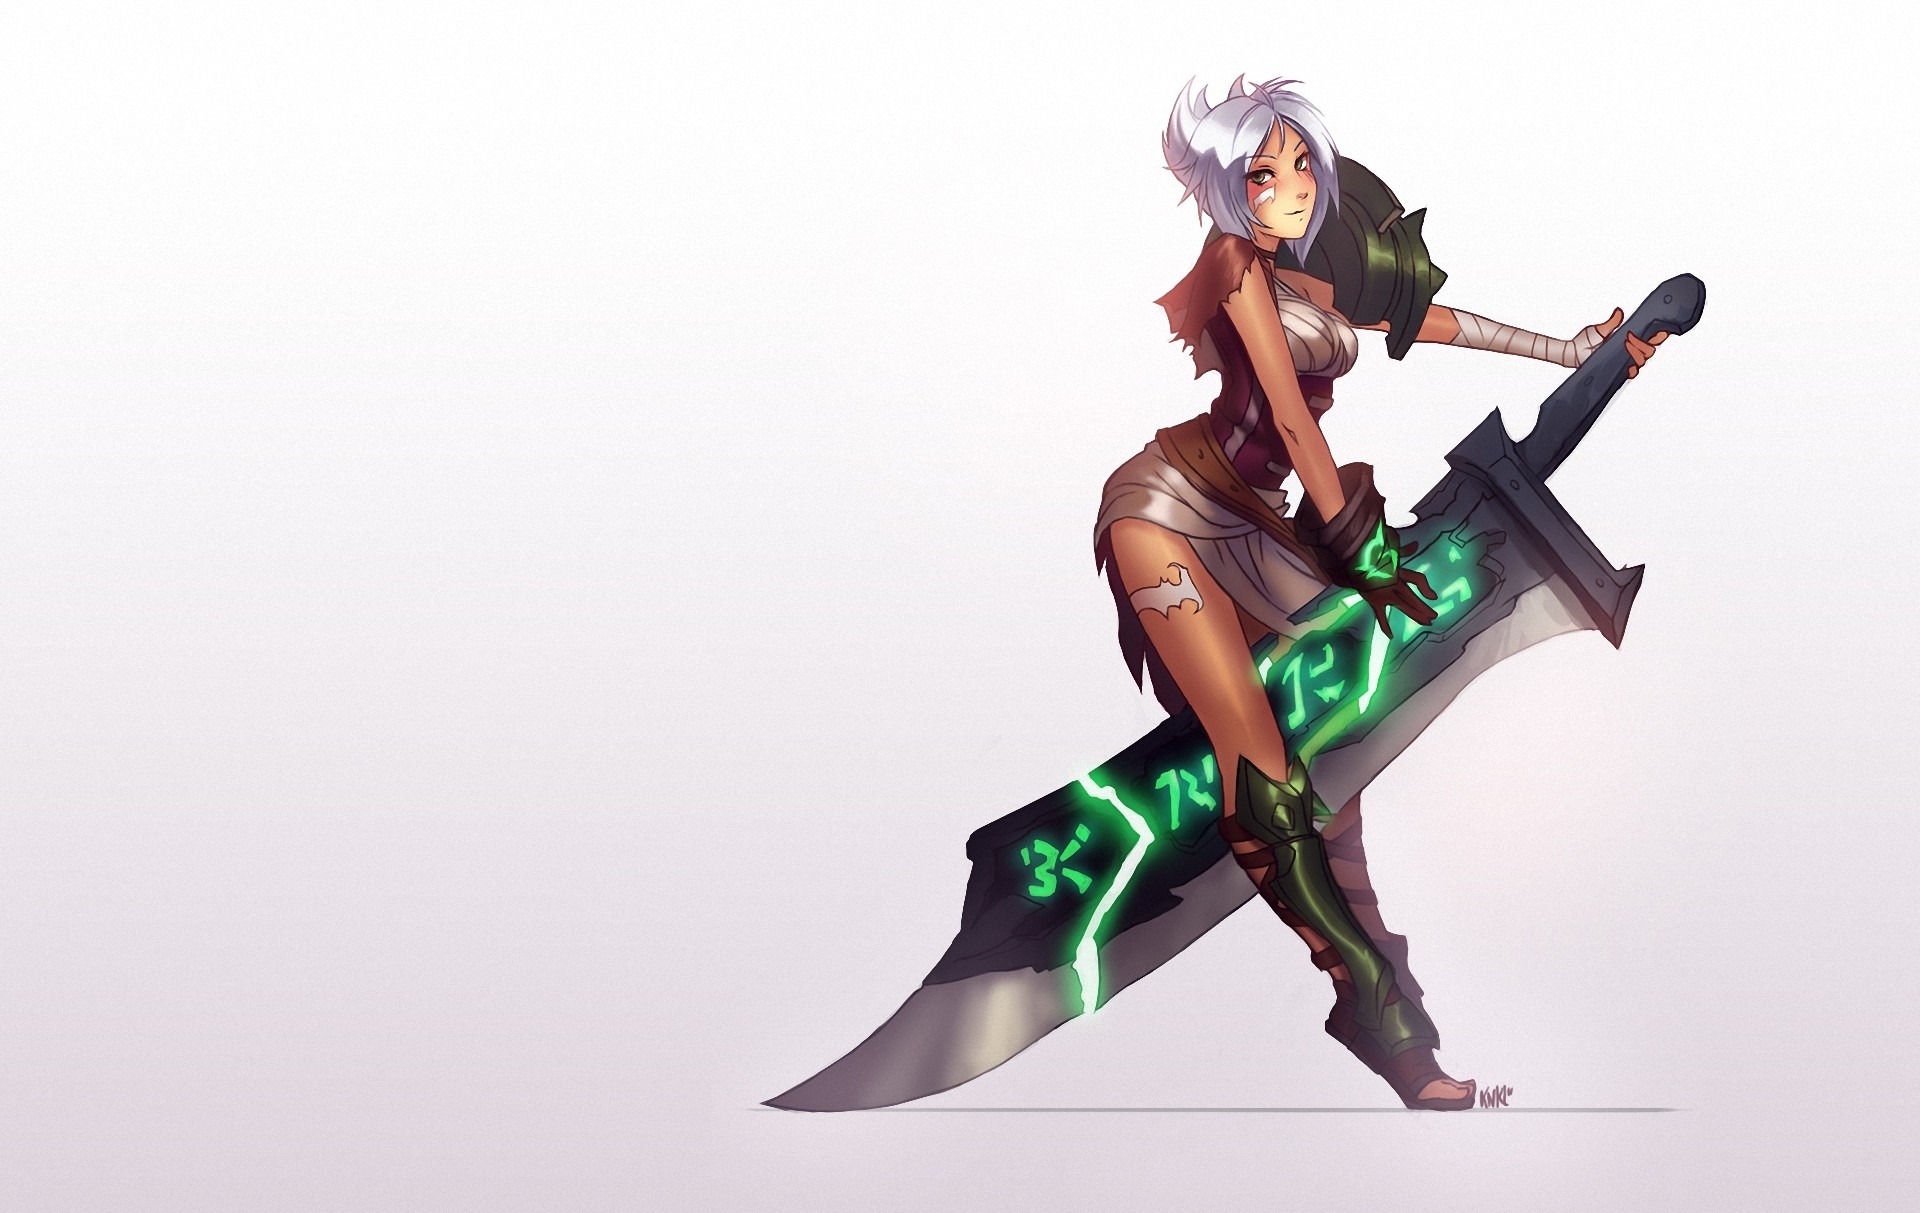 General 1920x1213 League of Legends Riven (League of Legends) simple background white background PC gaming anime girls anime sword video game art video game girls women with swords legs looking at viewer fantasy art fantasy girl silver hair